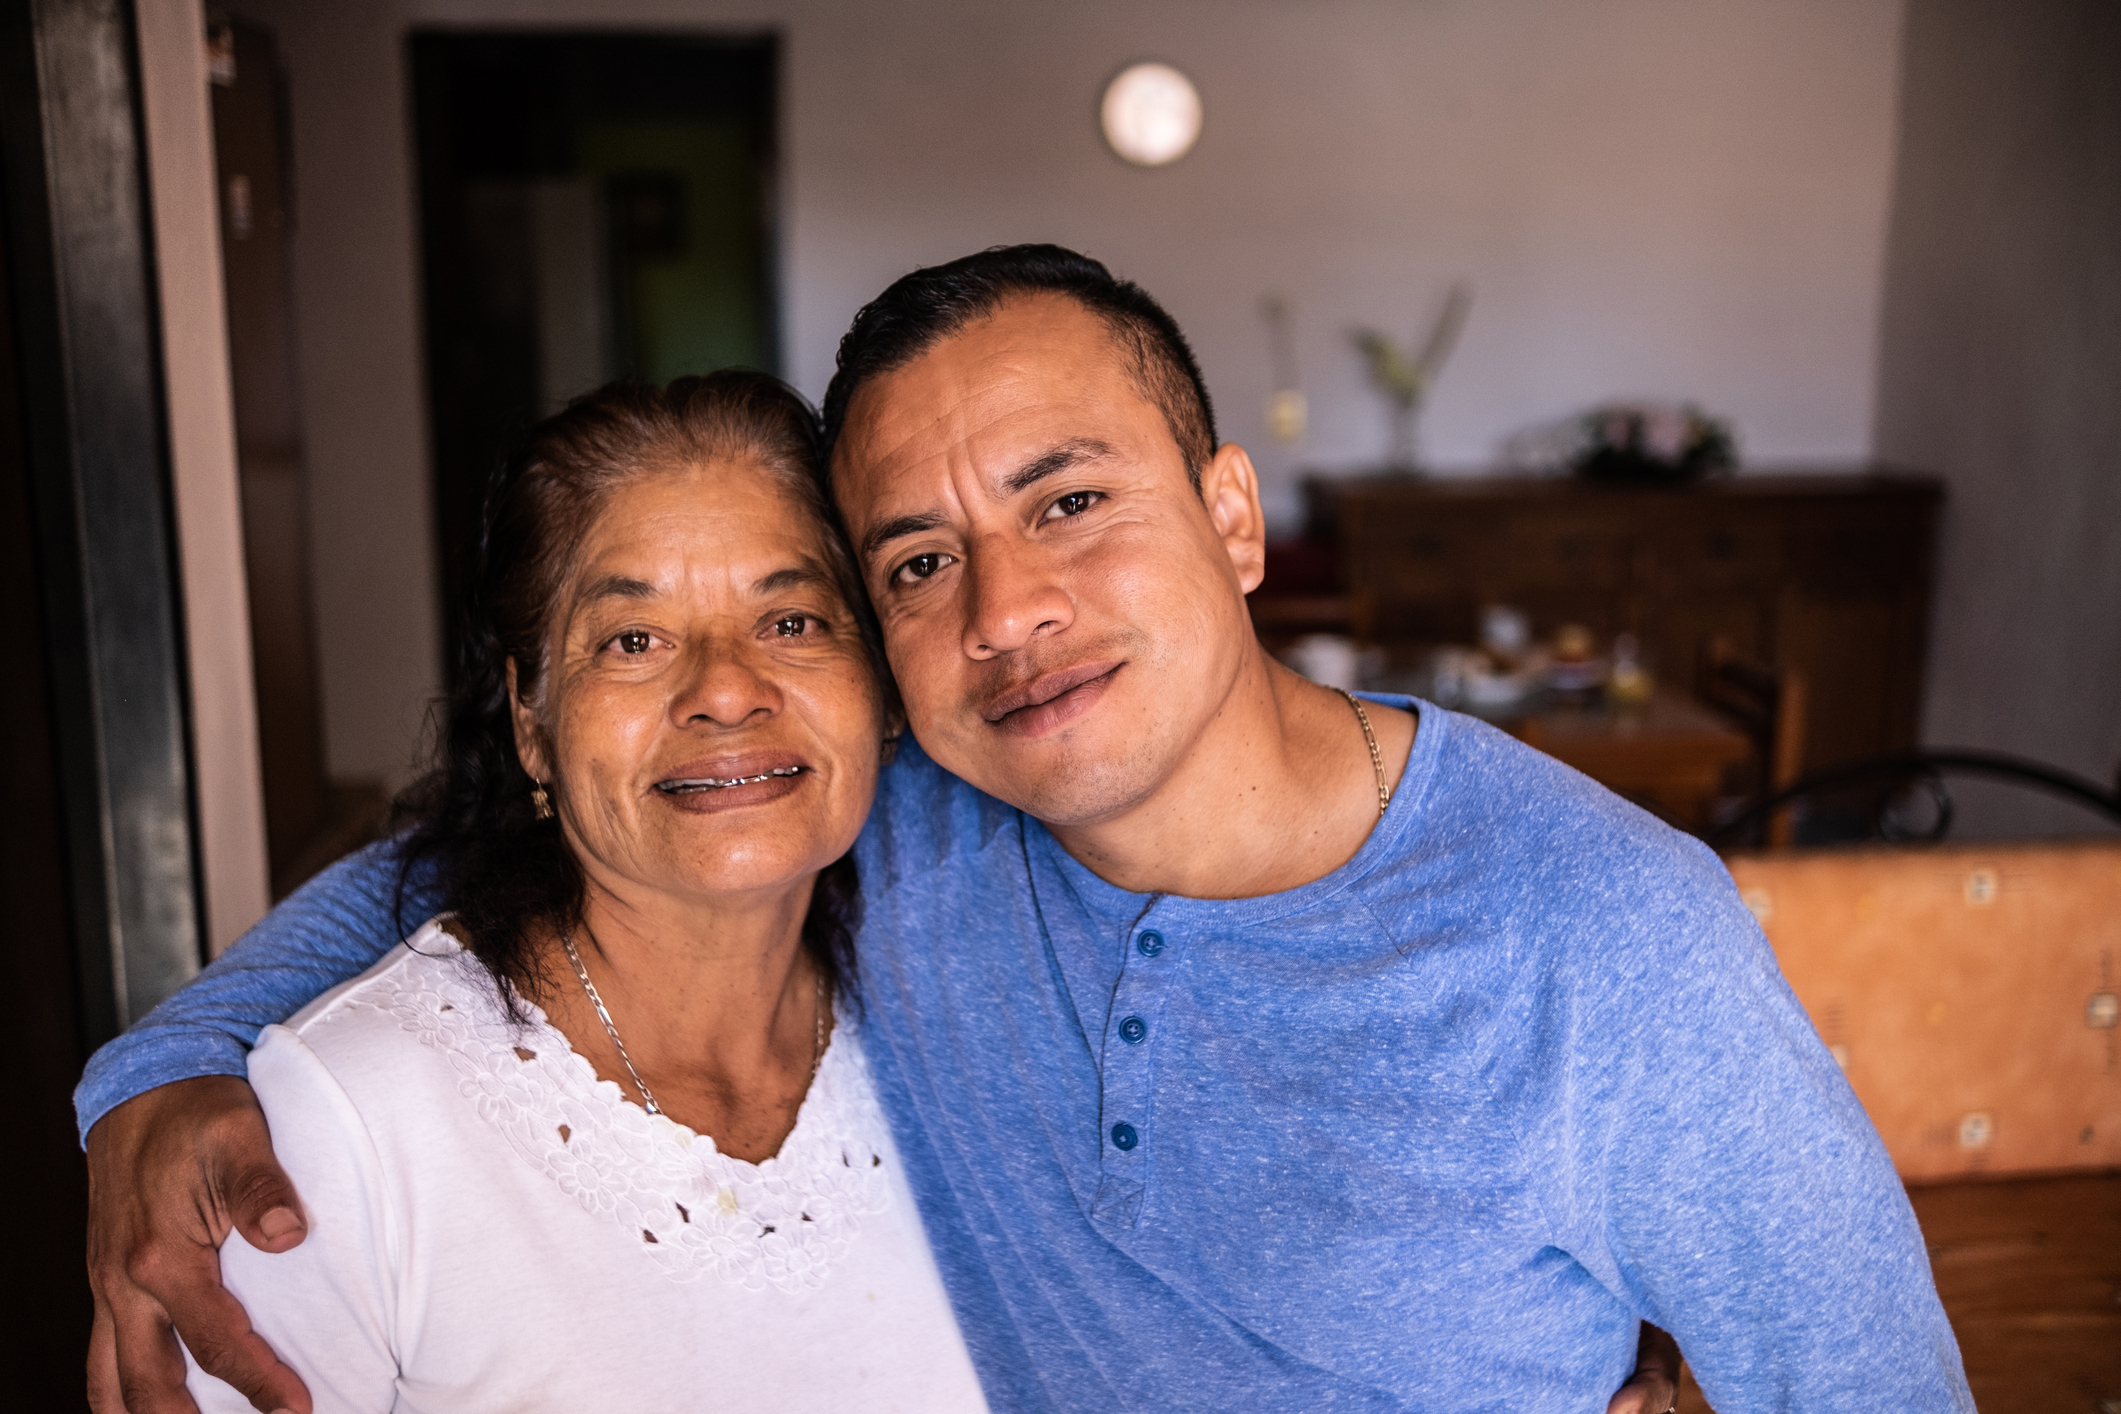 Woman and younger man smiling and embracing in a home kitchen